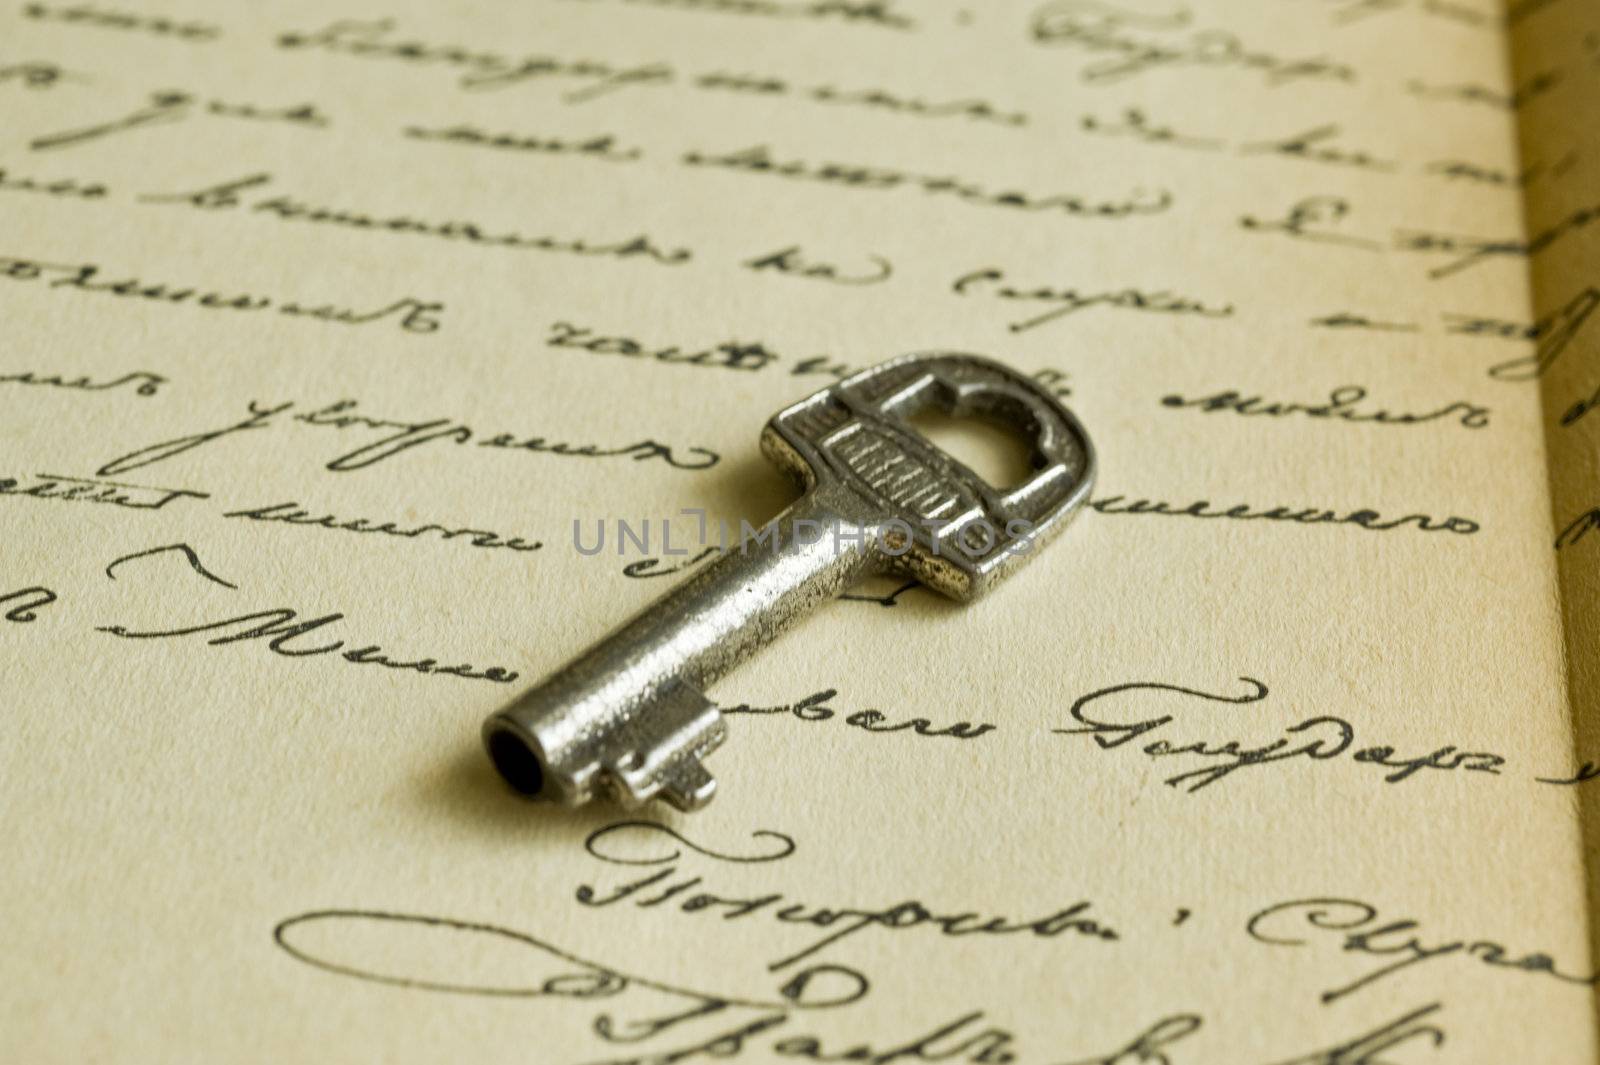 Key and old manuscript by Alenmax